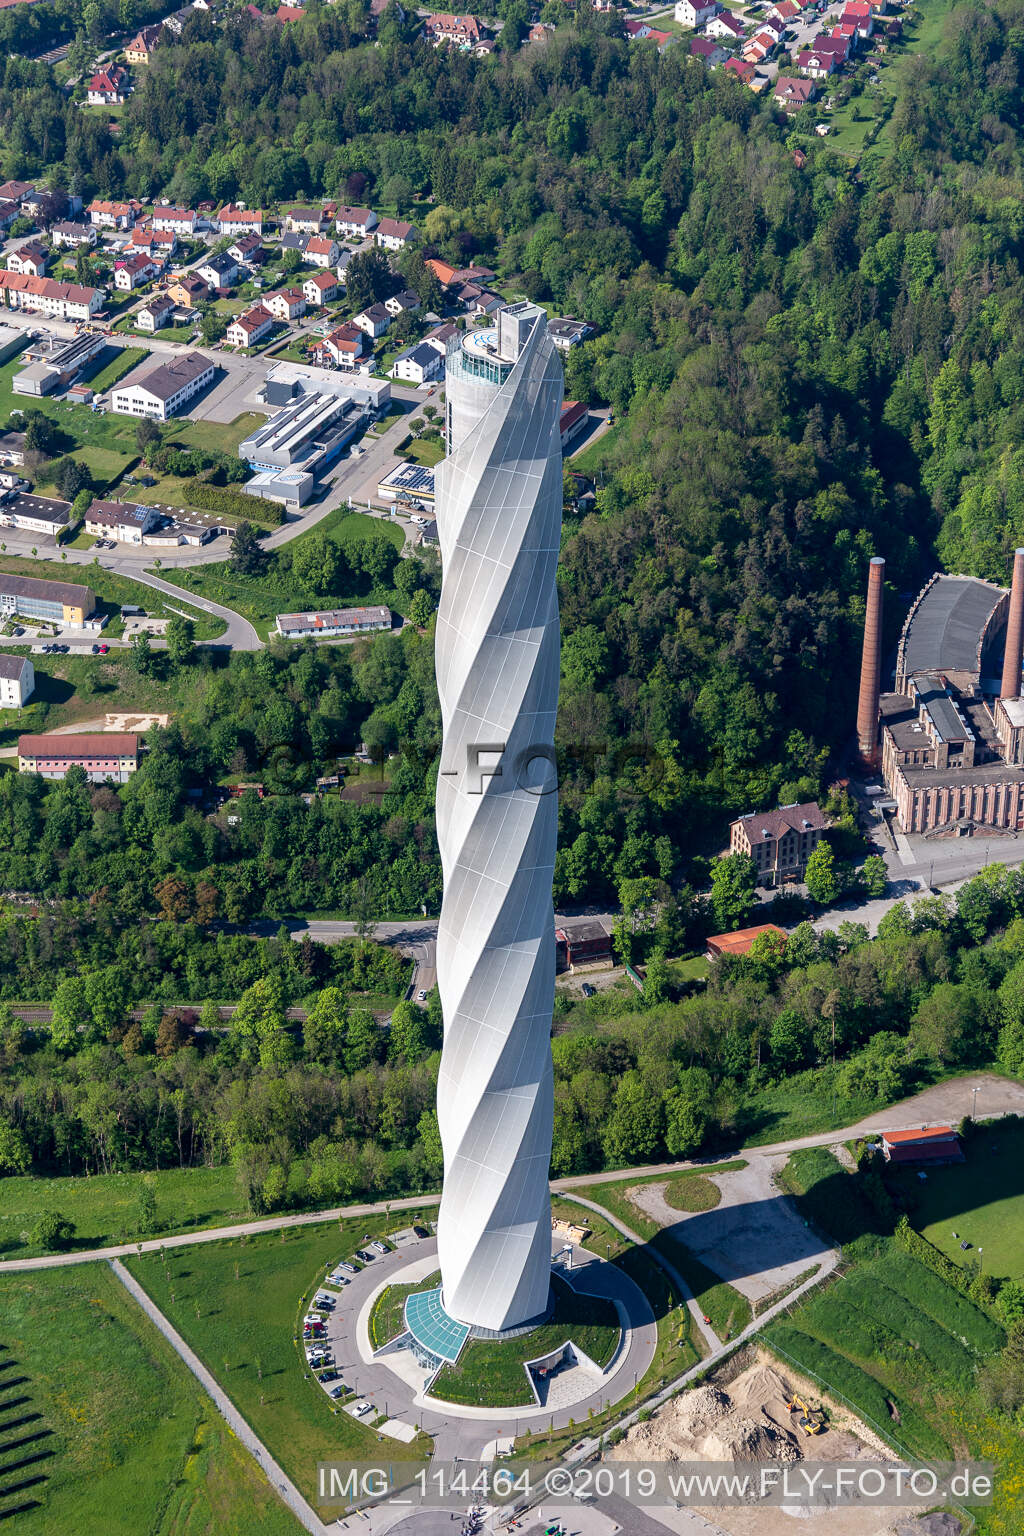 Aerial view of Thyssen-Krupp test tower for elevators in Rottweil in the state Baden-Wuerttemberg, Germany